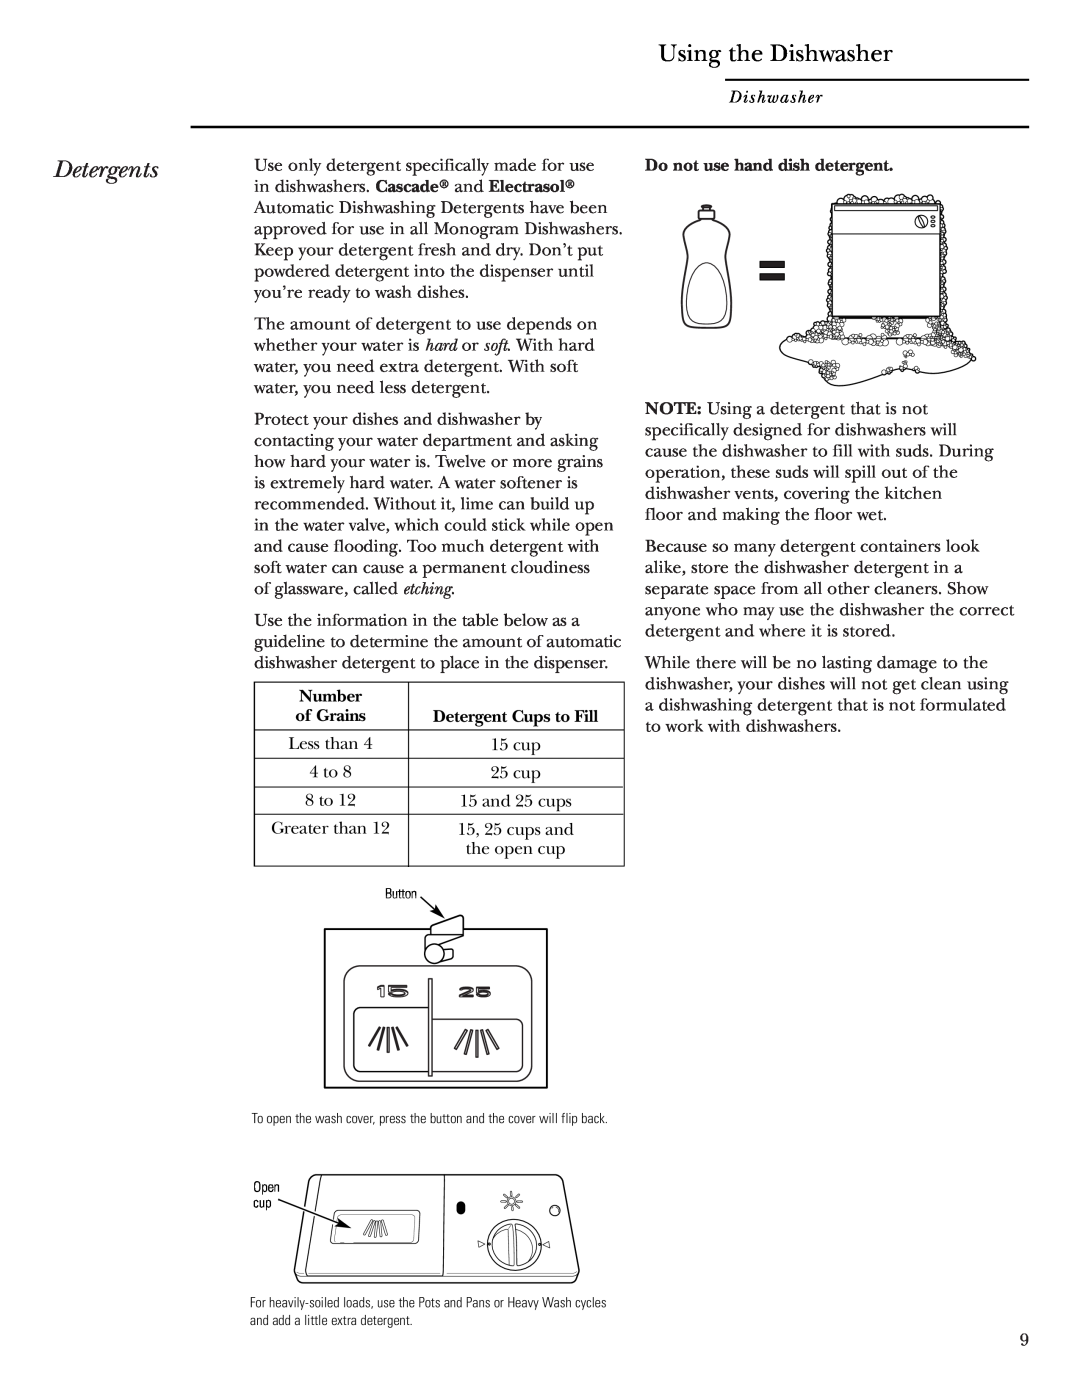 GE ZBD1800 owner manual Using the Dishwasher, Detergents 